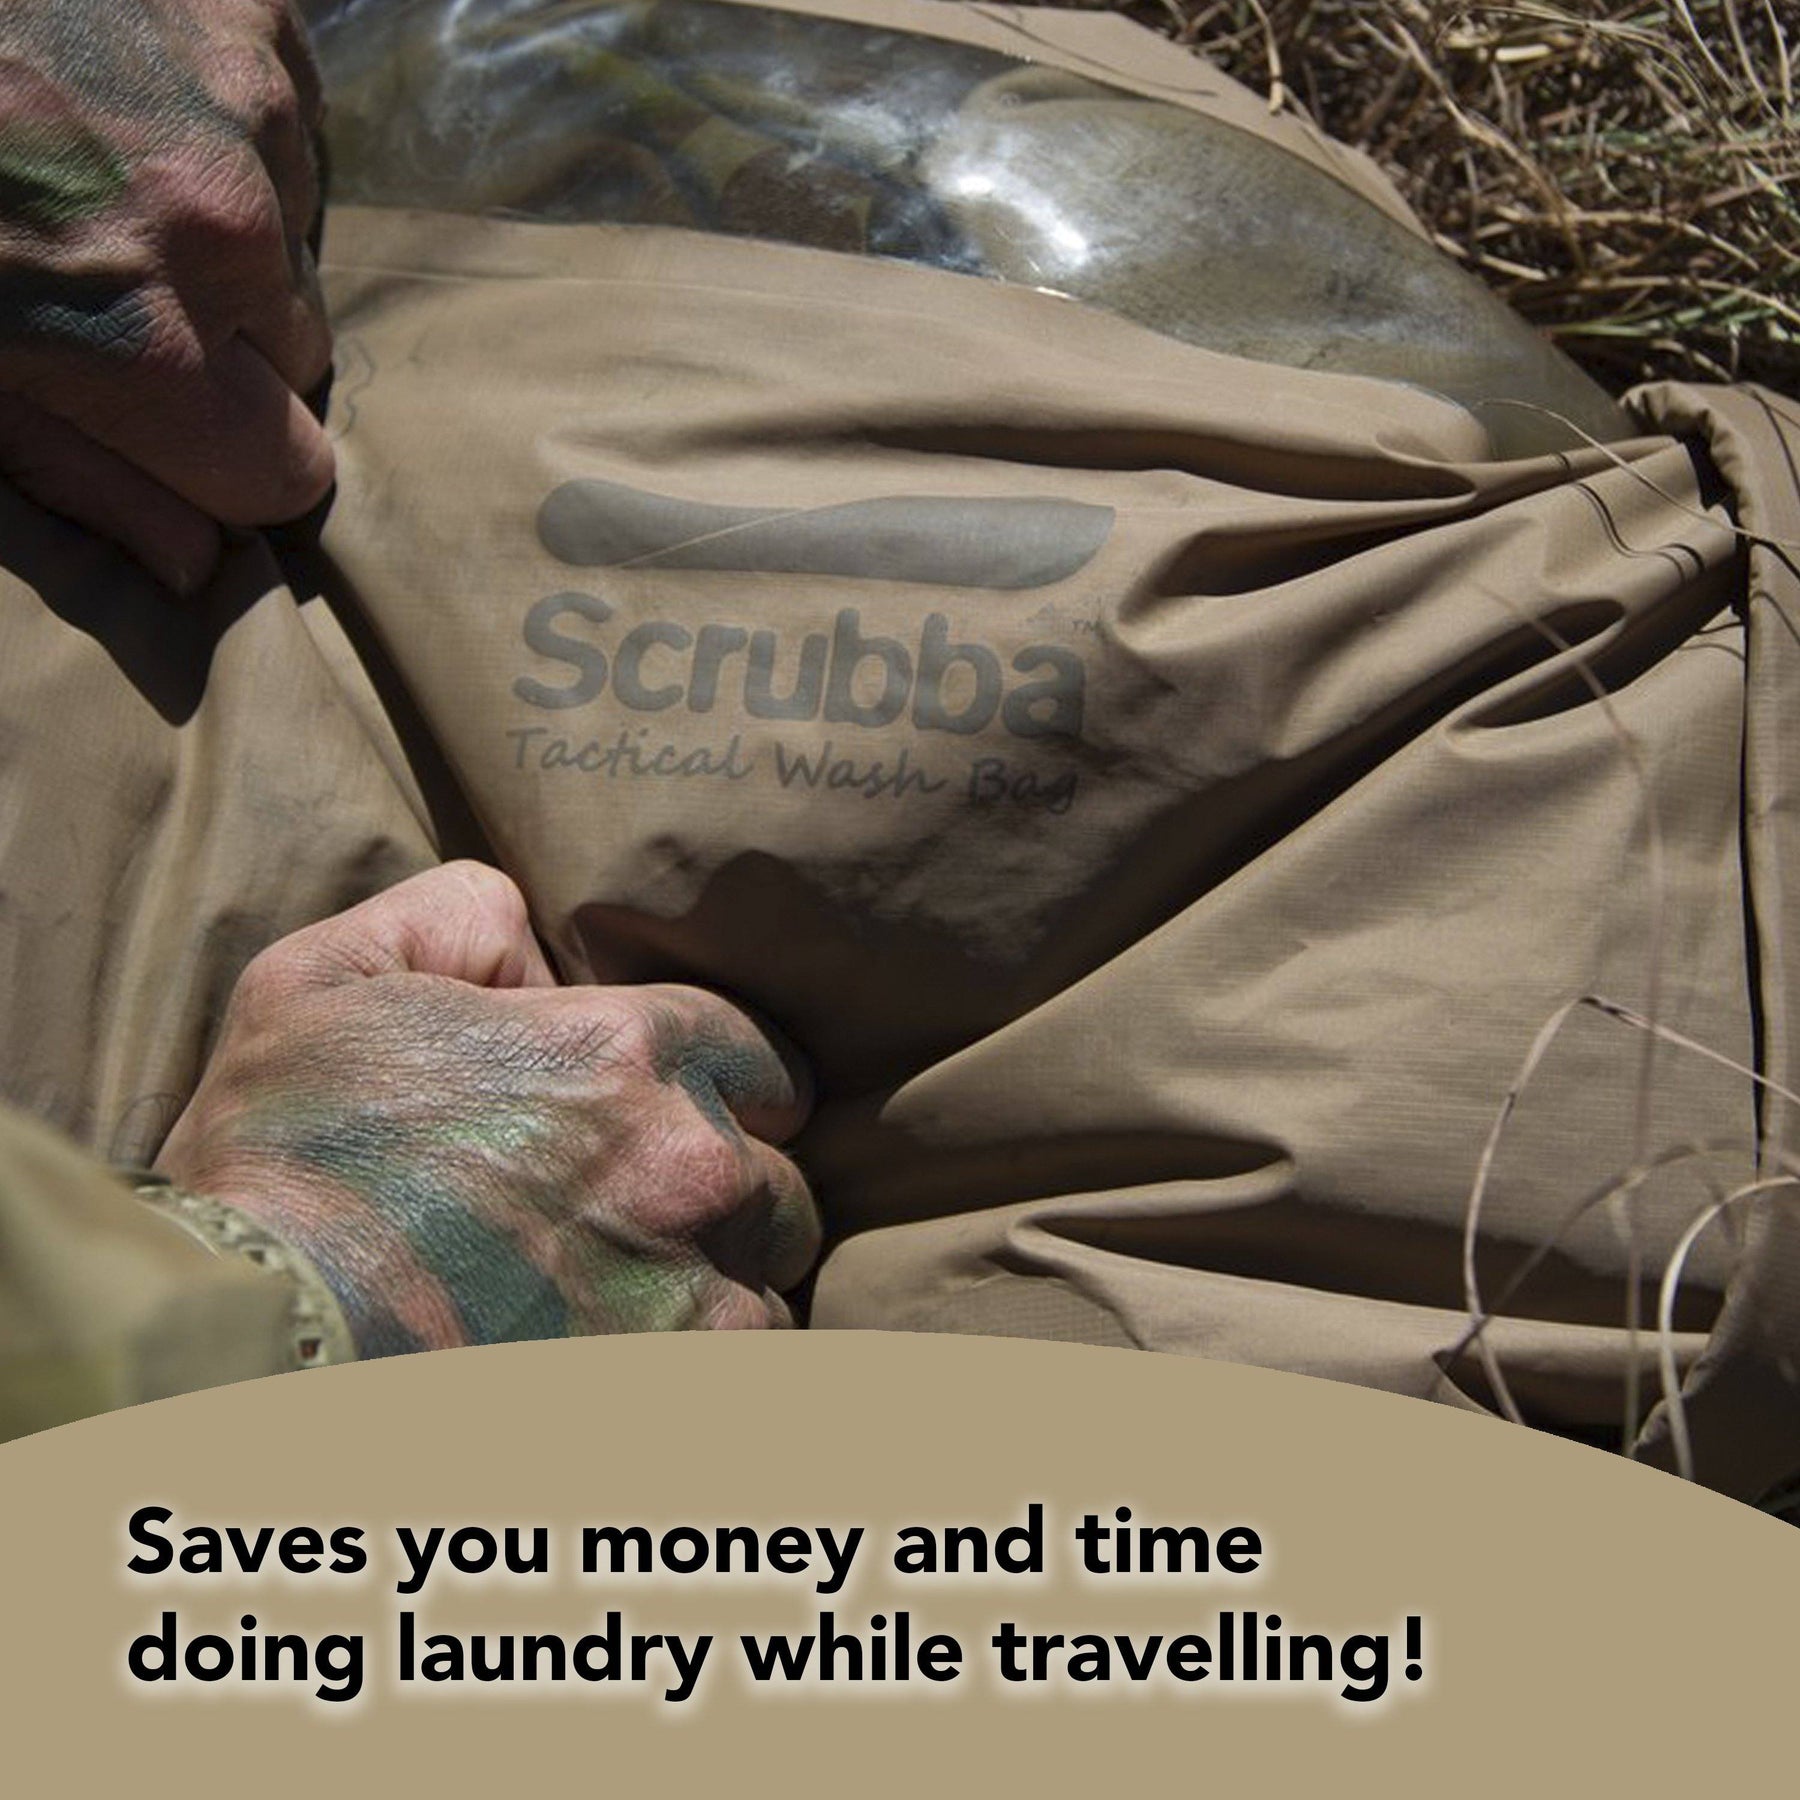 Review of the Scrubba Tactical Wash Bag